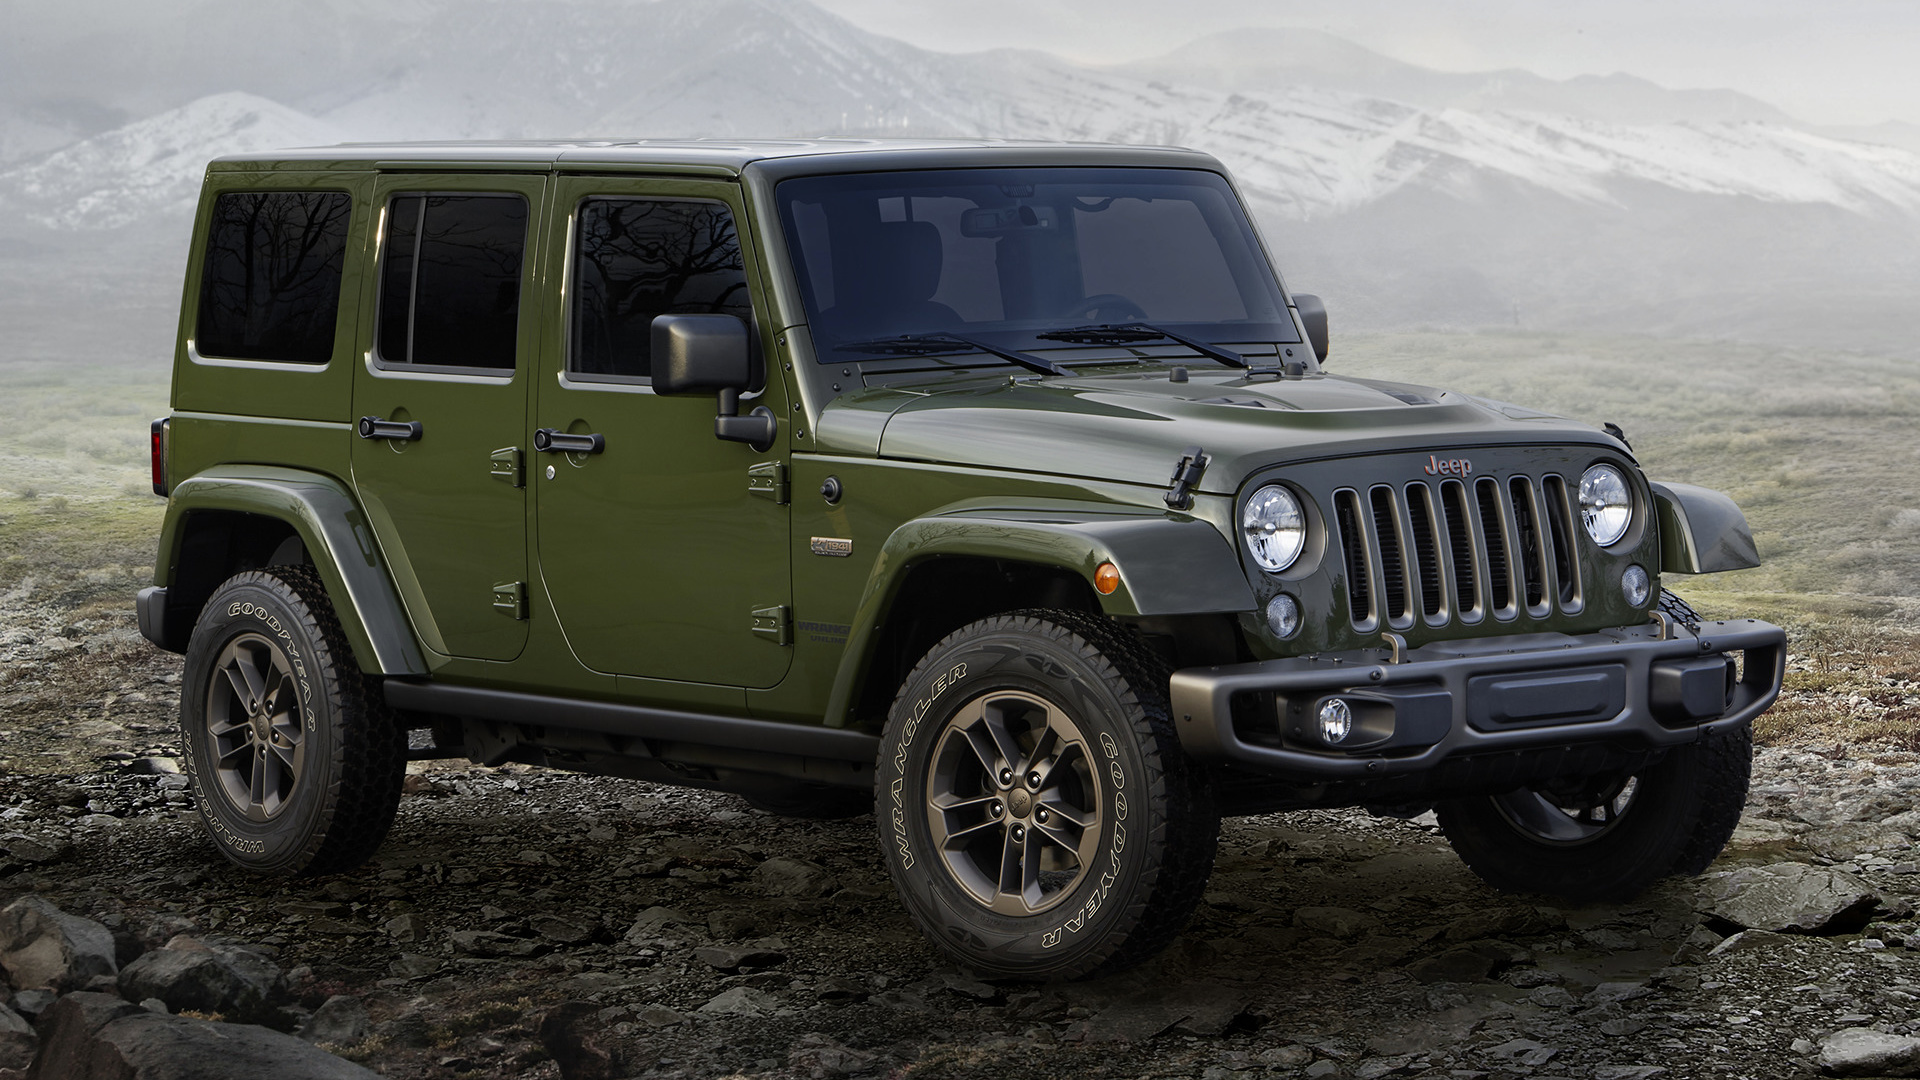 HD desktop wallpaper: Car, Jeep, Off Road, Vehicles, Green Car, Jeep  Wrangler Unlimited 75Th Anniversary download free picture #489154